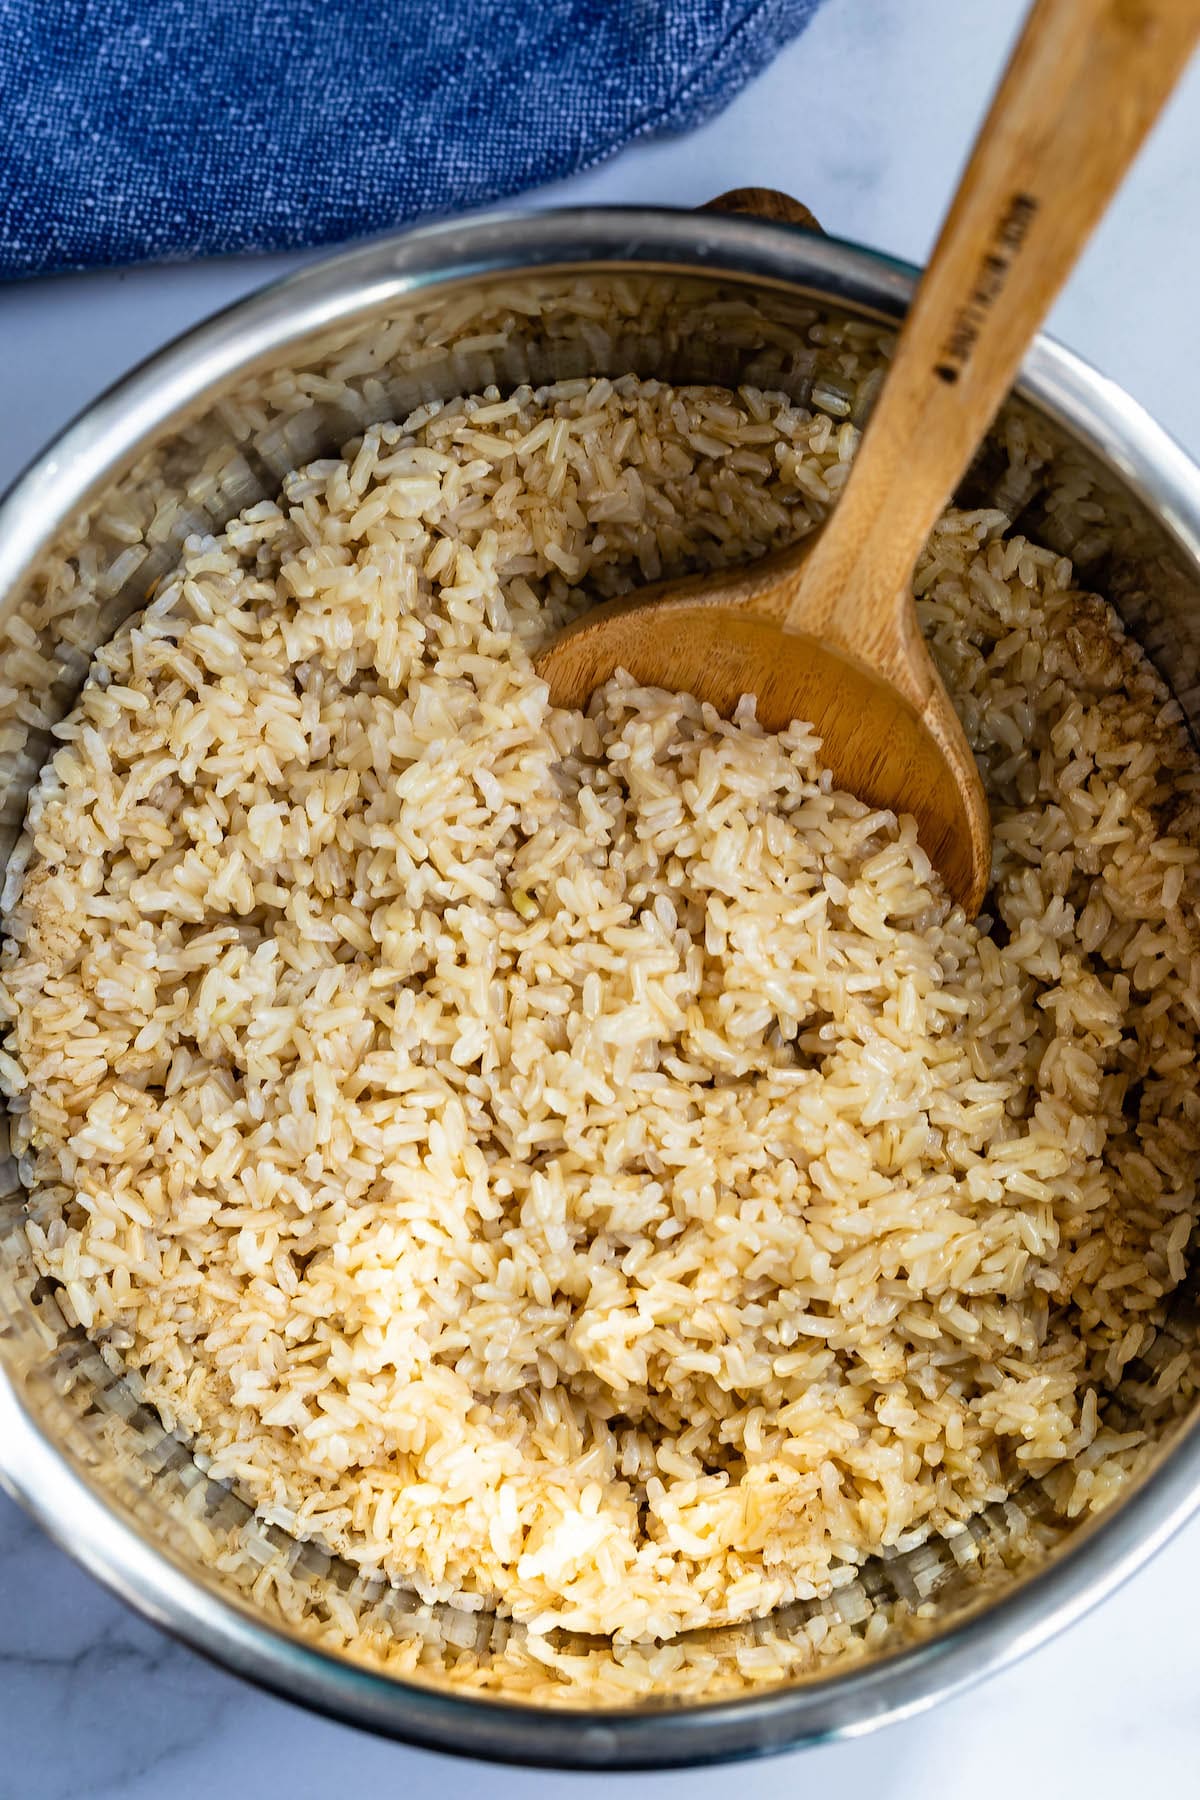 brown rice in a metal bowl with a wooden spoon in the rice